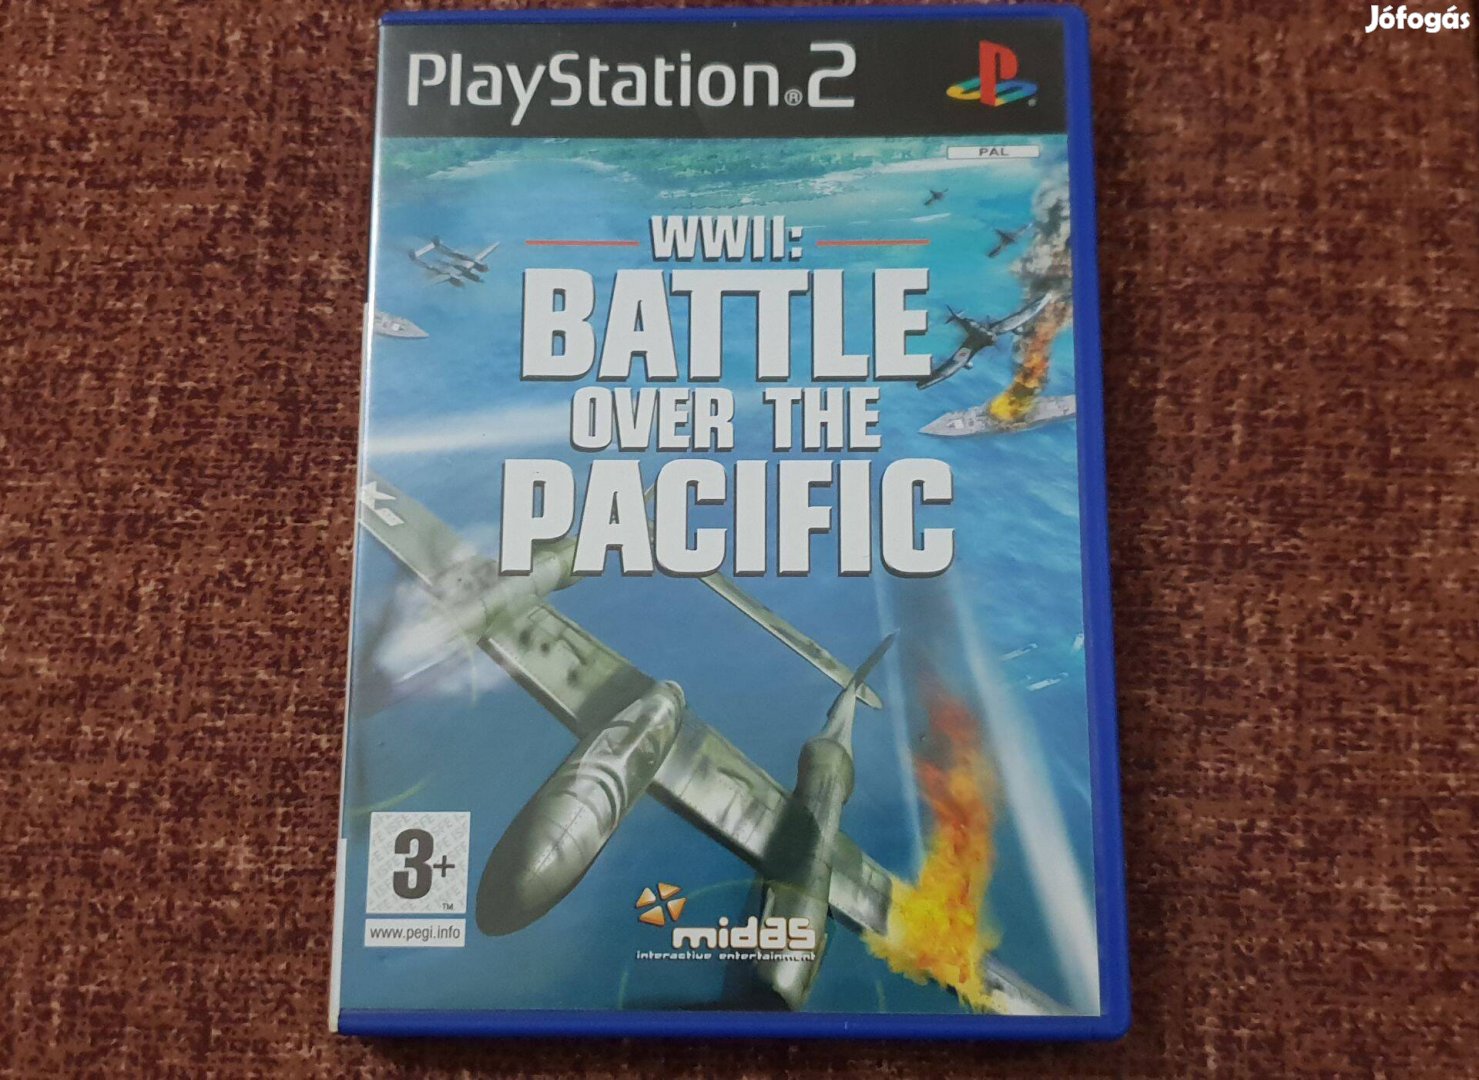 WWII Battle Over the Pacific Ps2 eredeti lemez ( 2500 Ft )